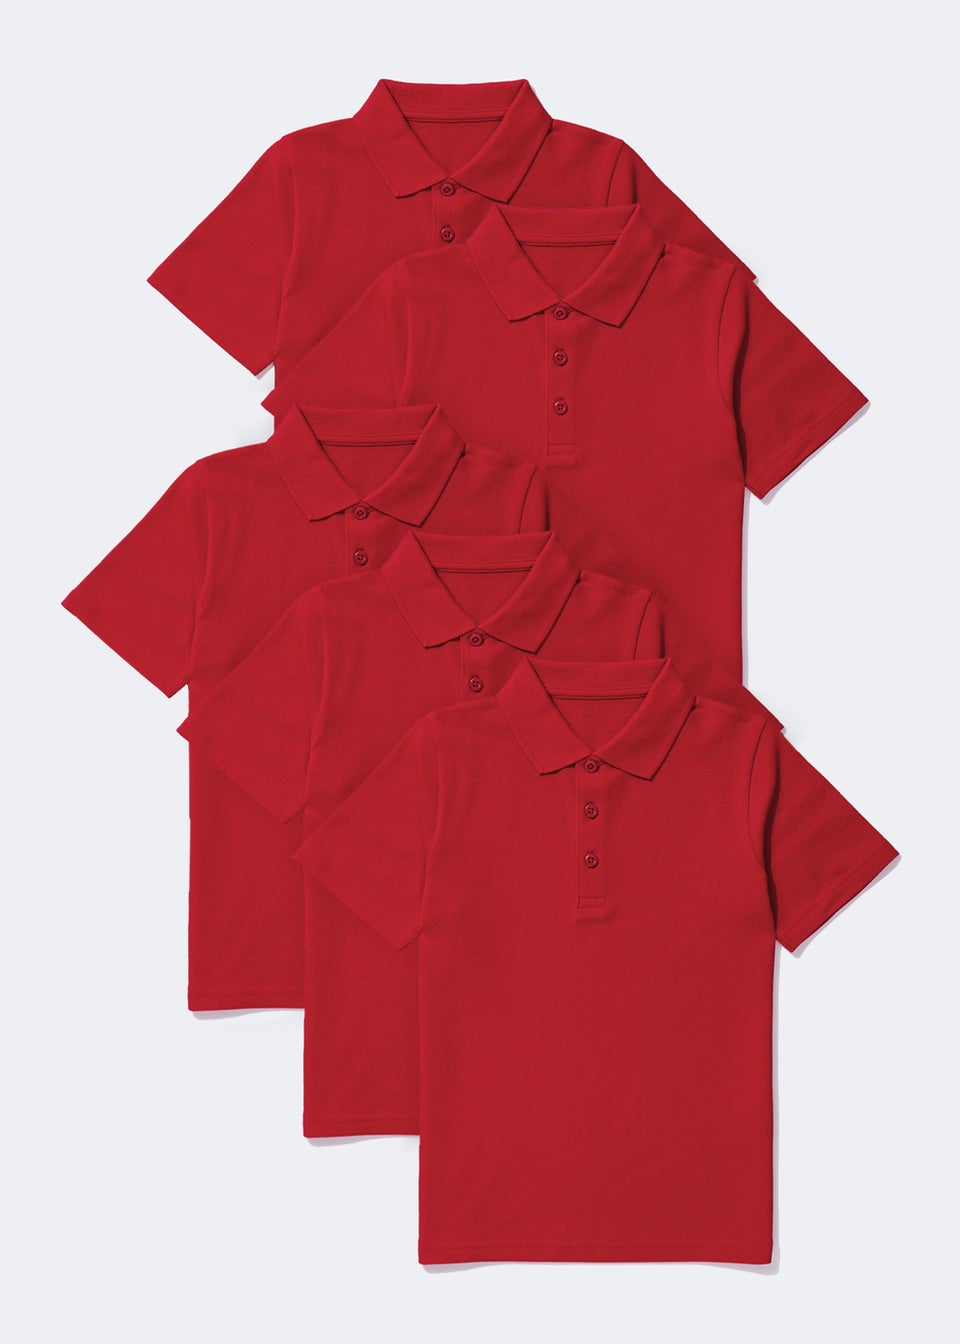 Kids 5 Pack Red School Polo Shirts (3-13yrs)